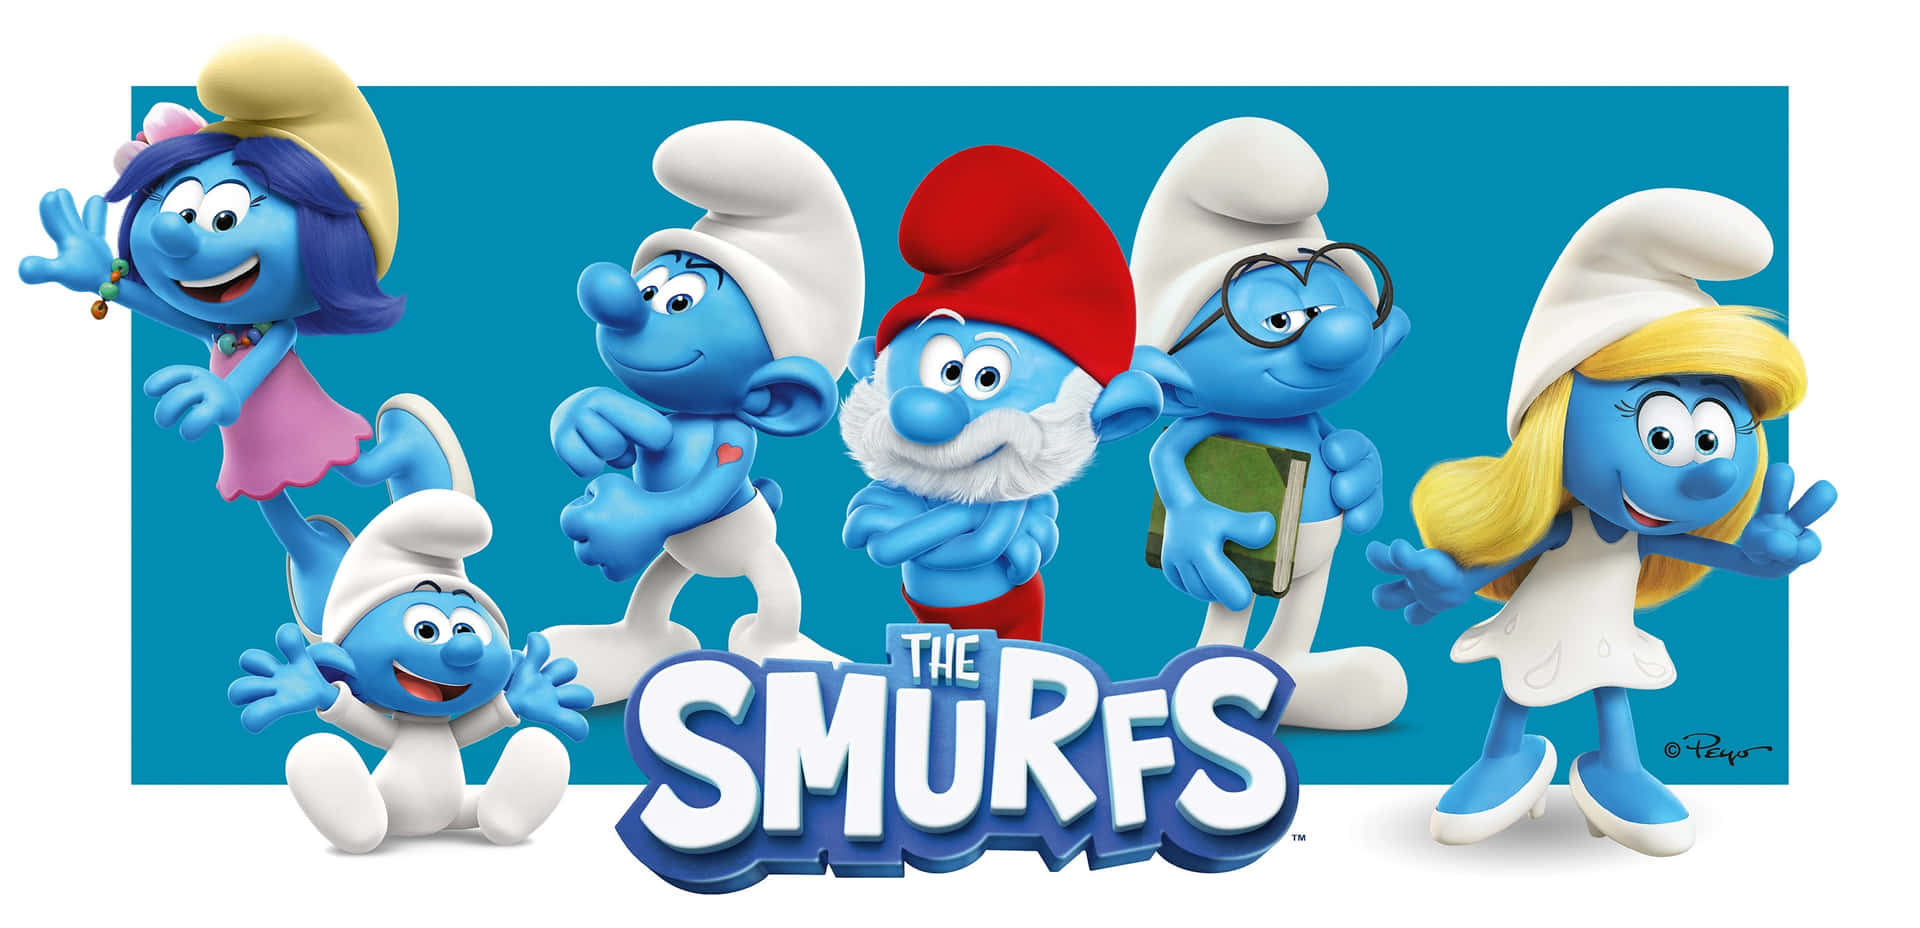 Smurf is Having Fun With His Little Village